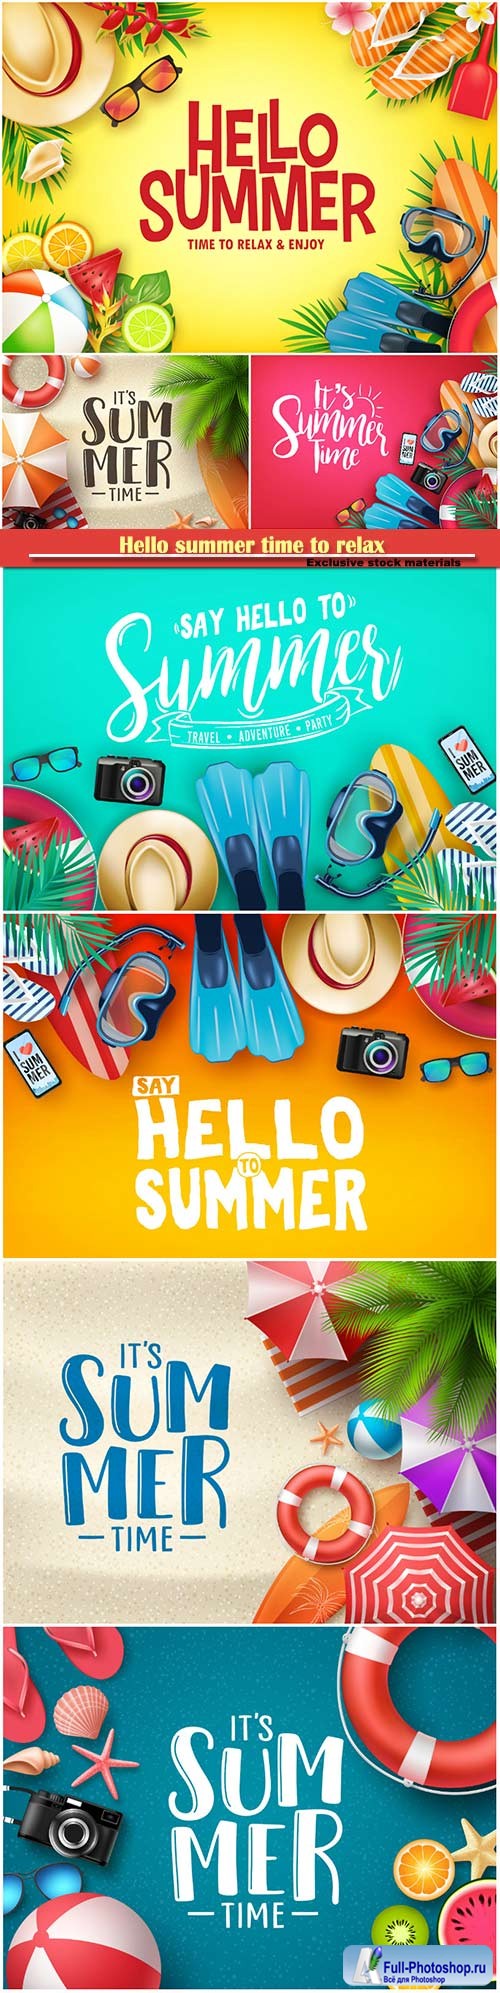 Hello summer time to relax and enjoy vector illustration # 2